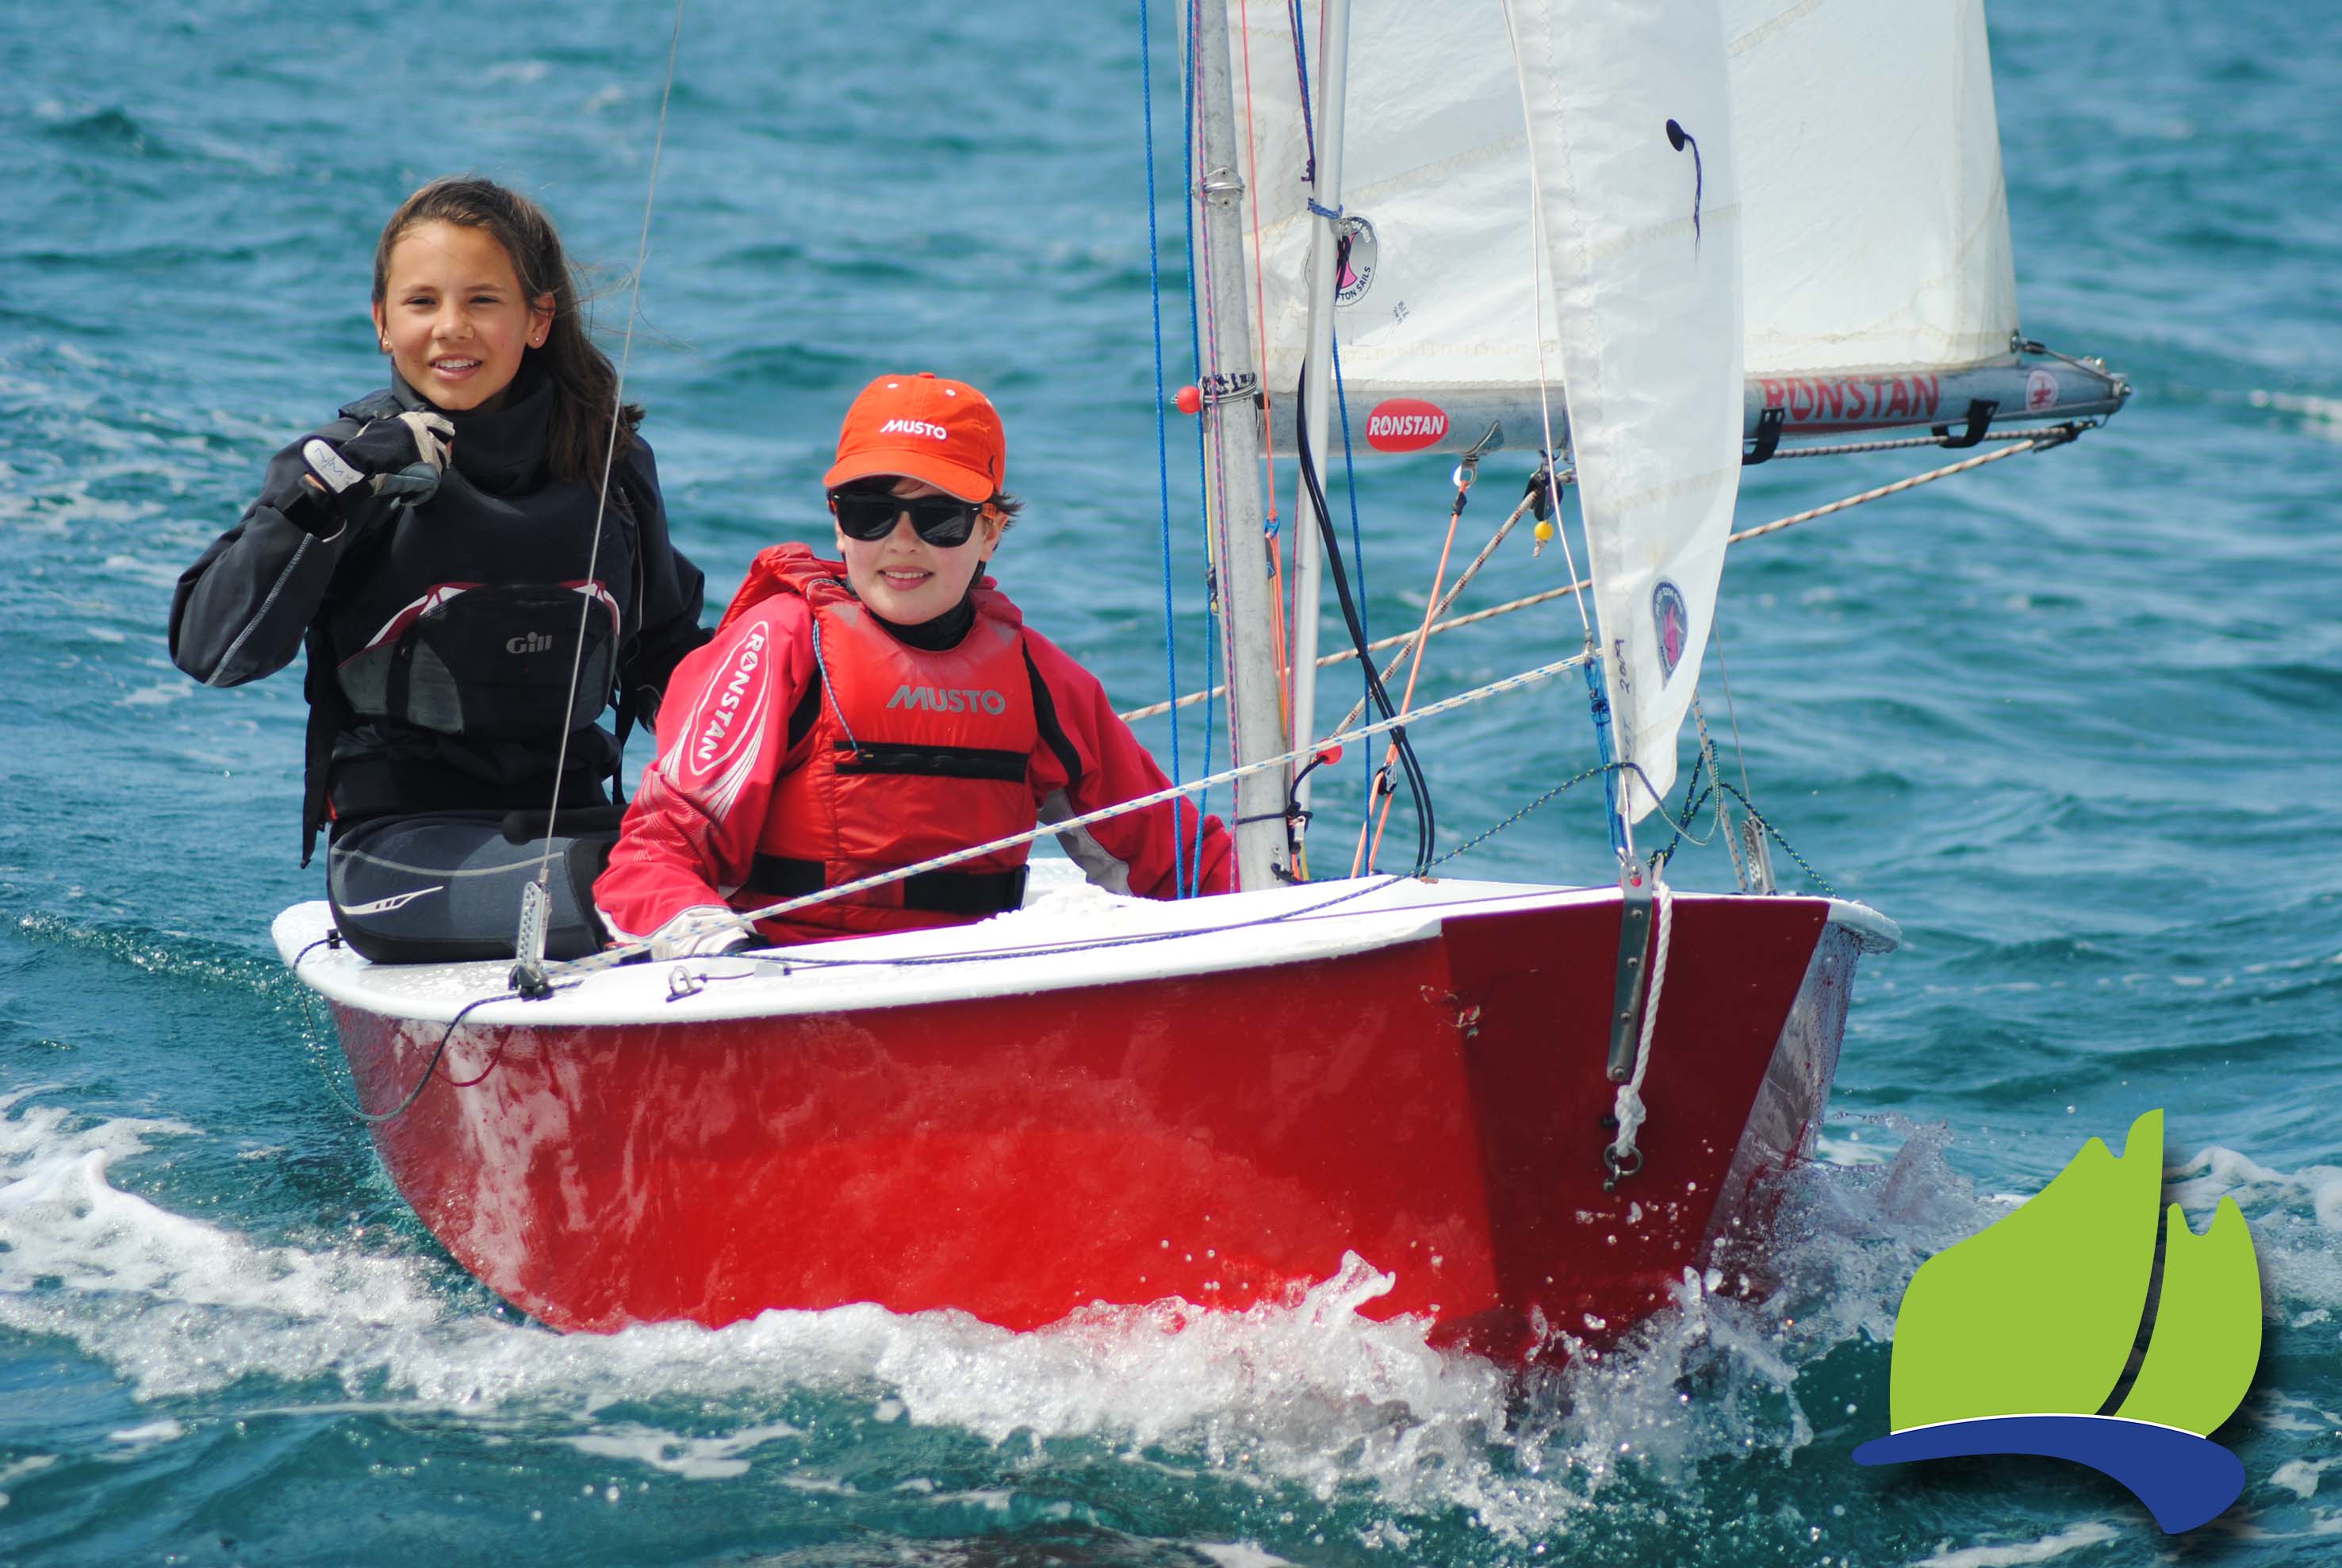 Ella Konings and Amy Short sailed their cadet, Wilson, in the Tri Series event in Port Lincoln.